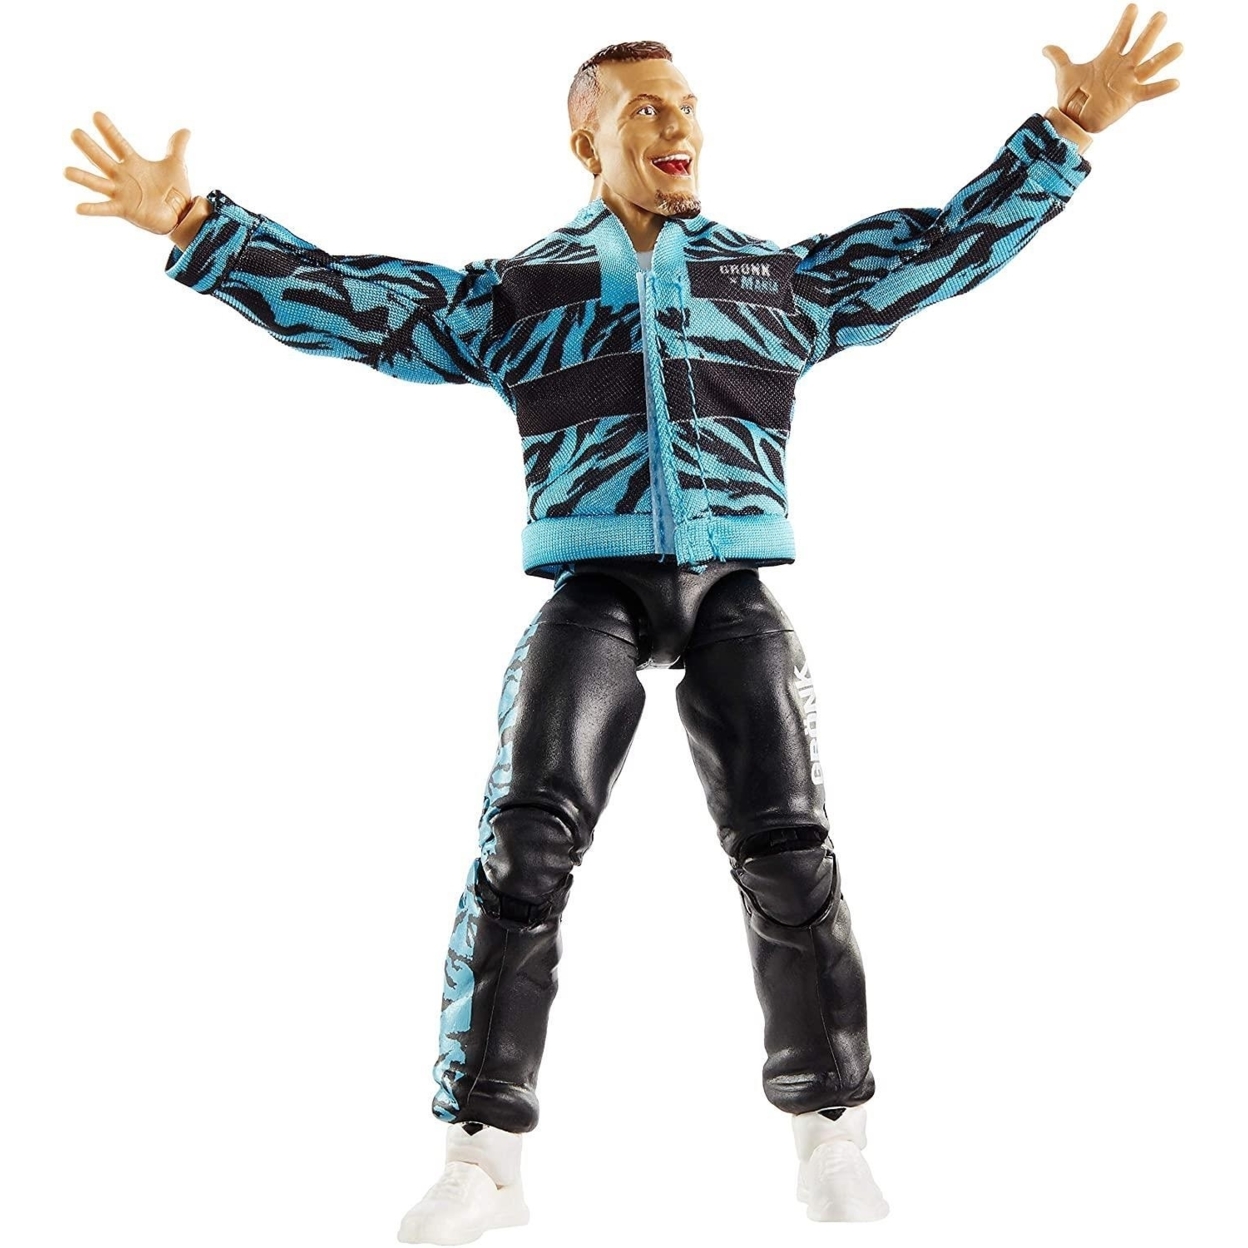 WWE Rob Gronkowski Elite Collection Action Figure with Accessories - image 4 of 7